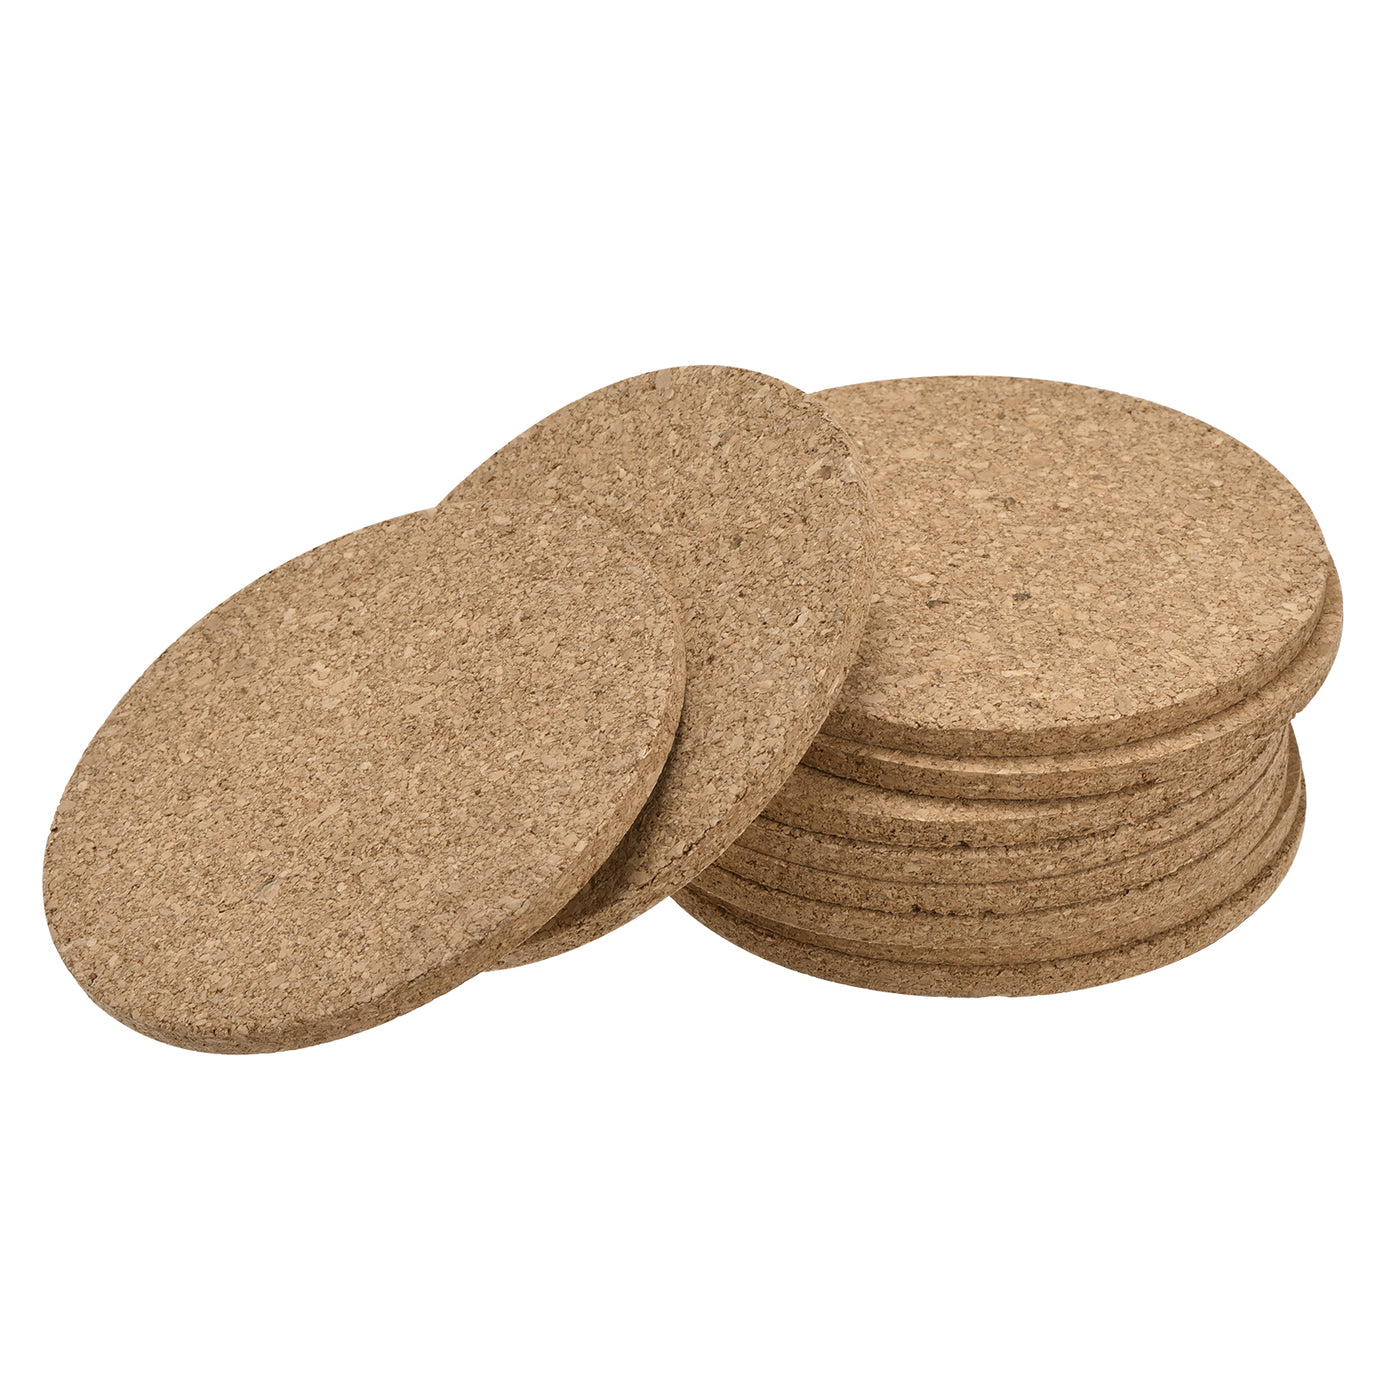 uxcell Uxcell 90mm(3.54") Round Coasters 4mm Thick Cork Cup Mat Pad for Tableware 10pcs